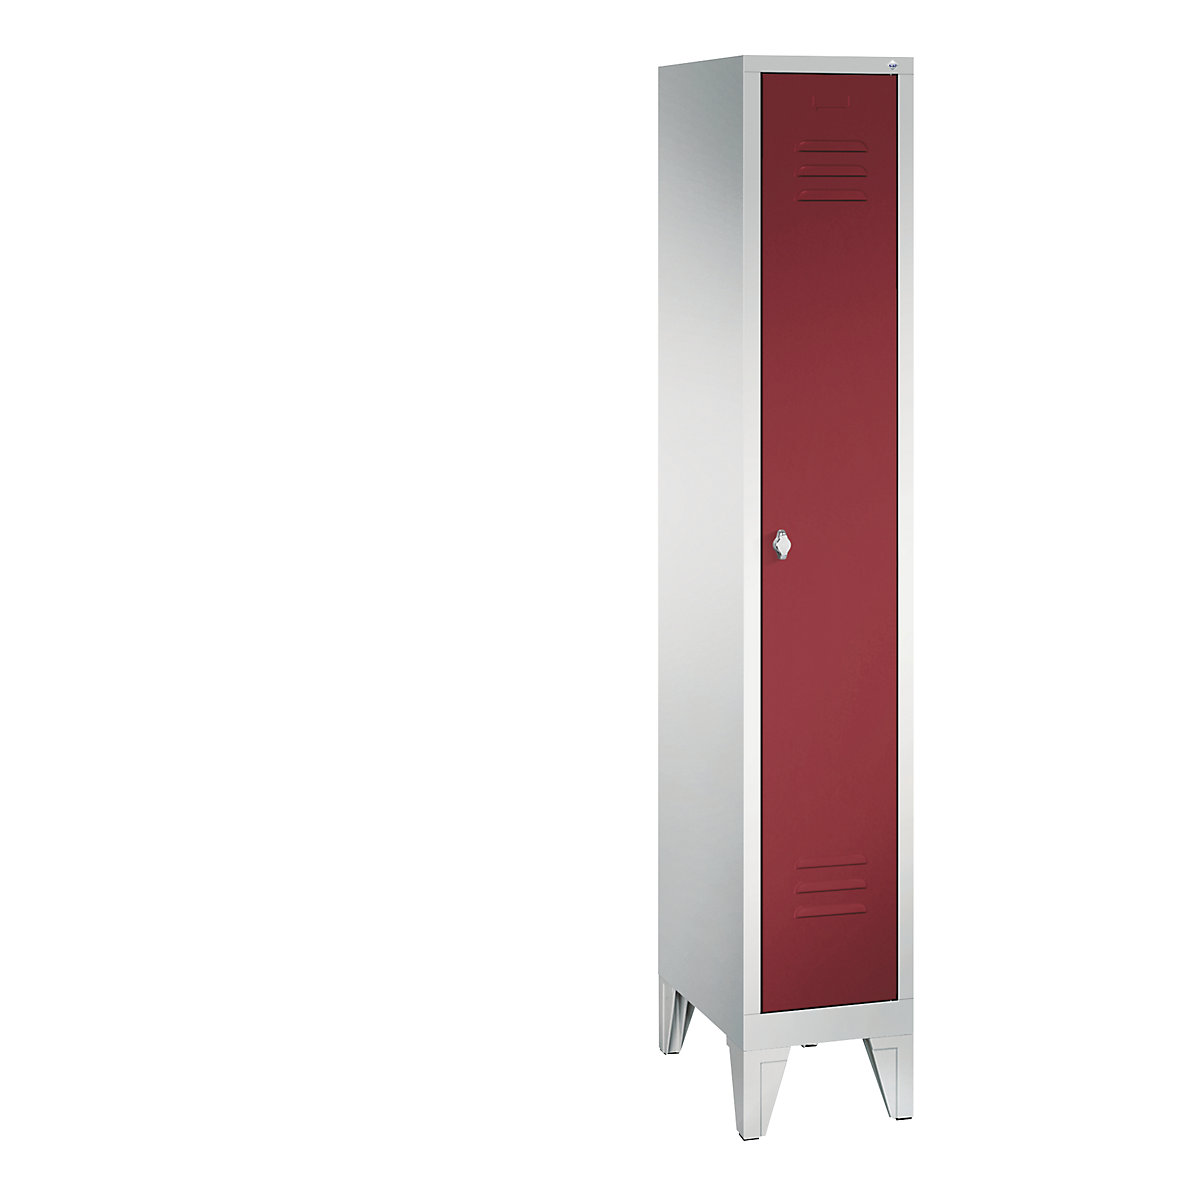 CLASSIC cloakroom locker with feet – C+P, 1 compartment, compartment width 300 mm, light grey / ruby red-13